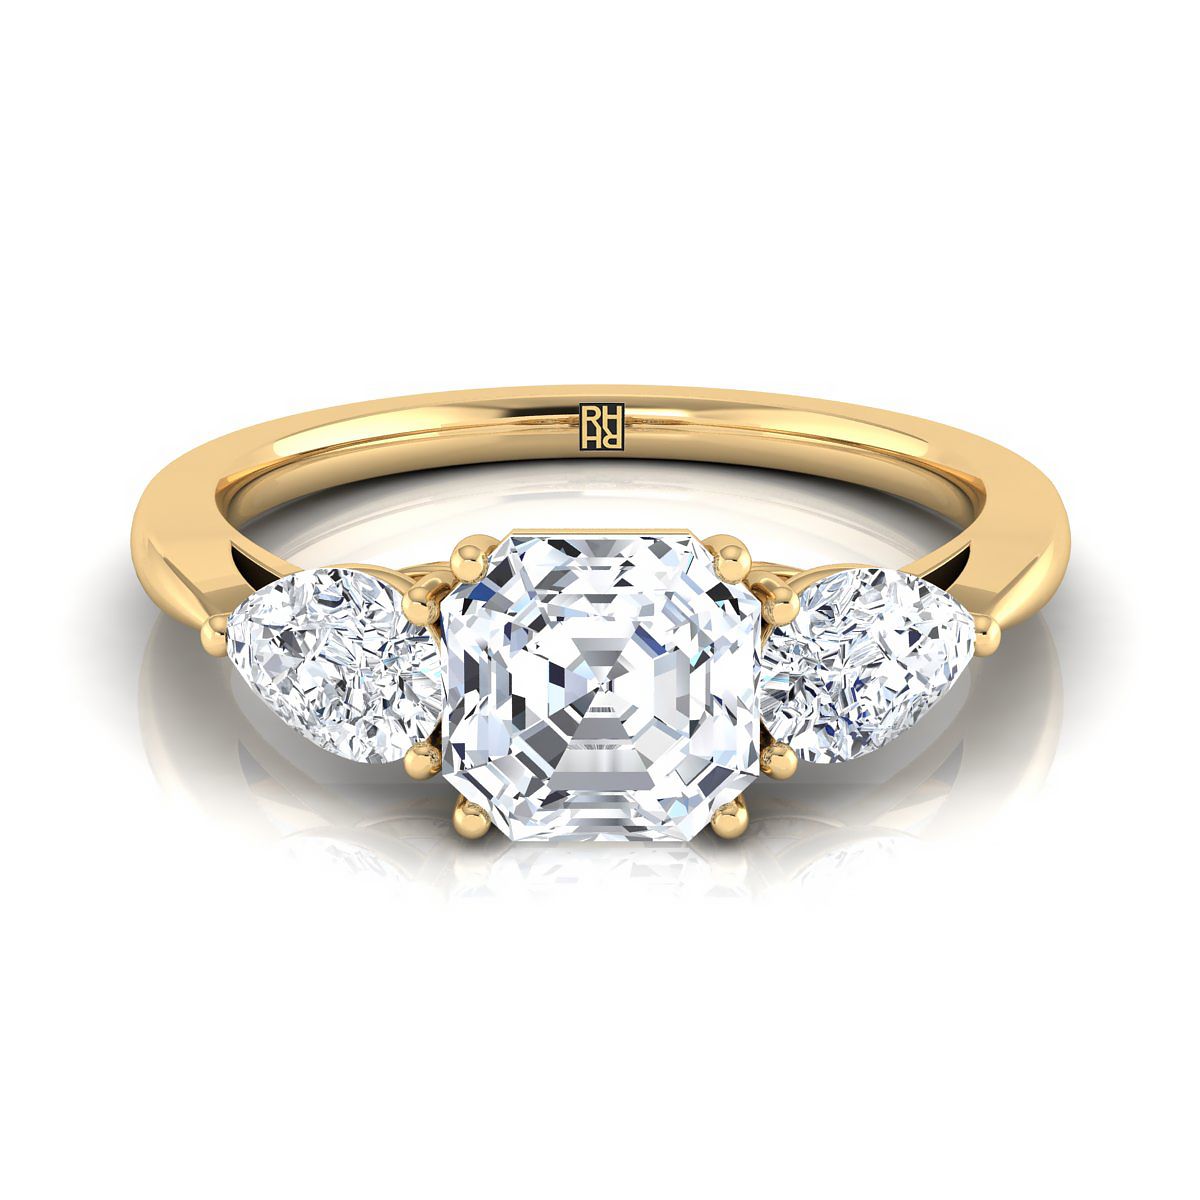 18K Yellow Gold Asscher Cut Diamond Perfectly Matched Pear Shaped Three Diamond Engagement Ring -7/8ctw